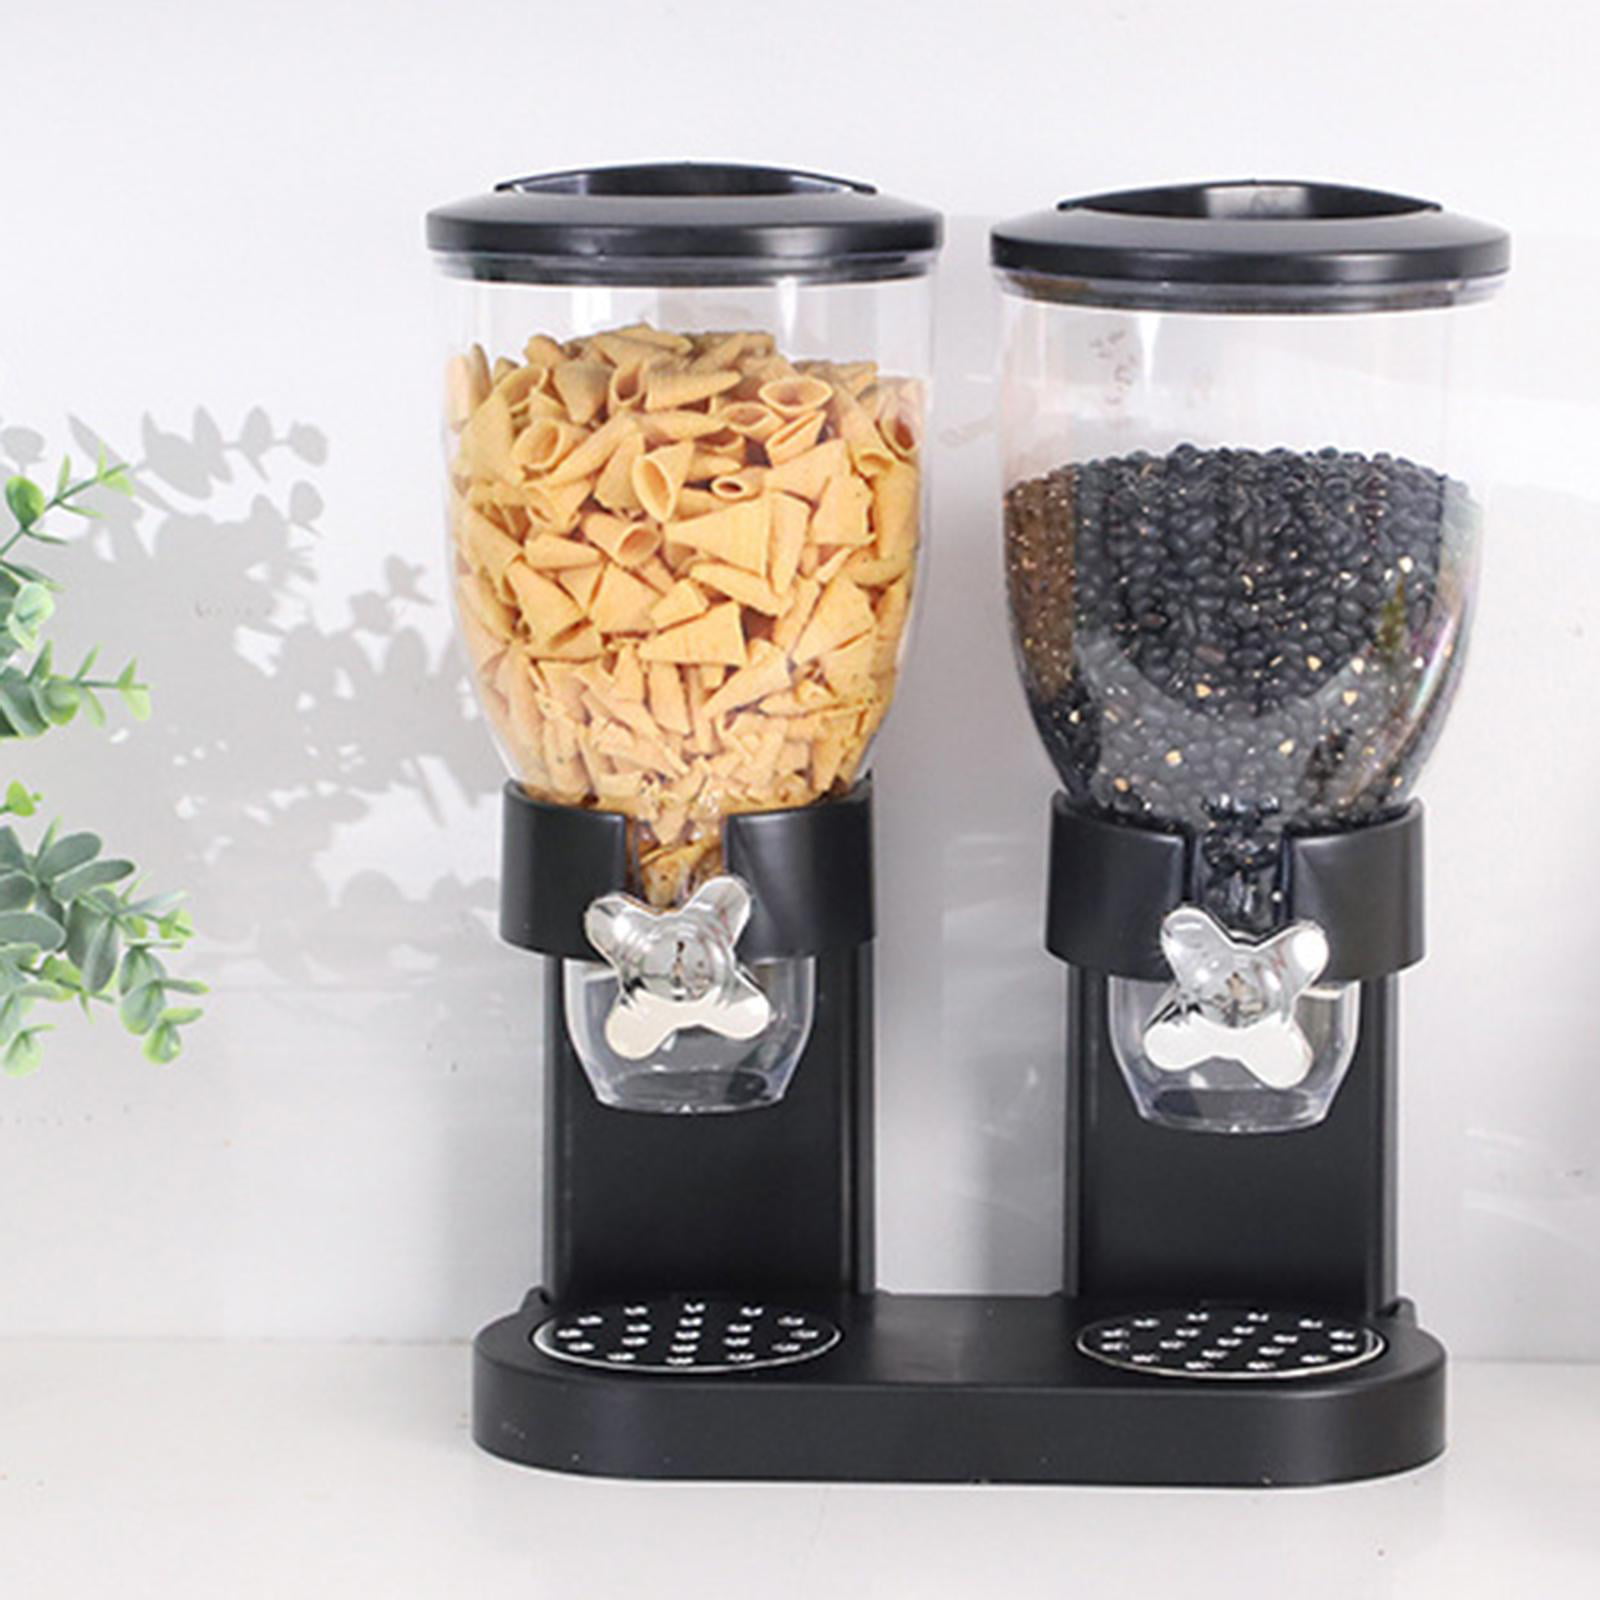 YJSSXJKO Cereal Dispenser Countertop,5L 2pc Organization and Storage Containers for Kitchen and Pantry,Dispensers for Dry Food,Candy,Rice,Grain,Nut